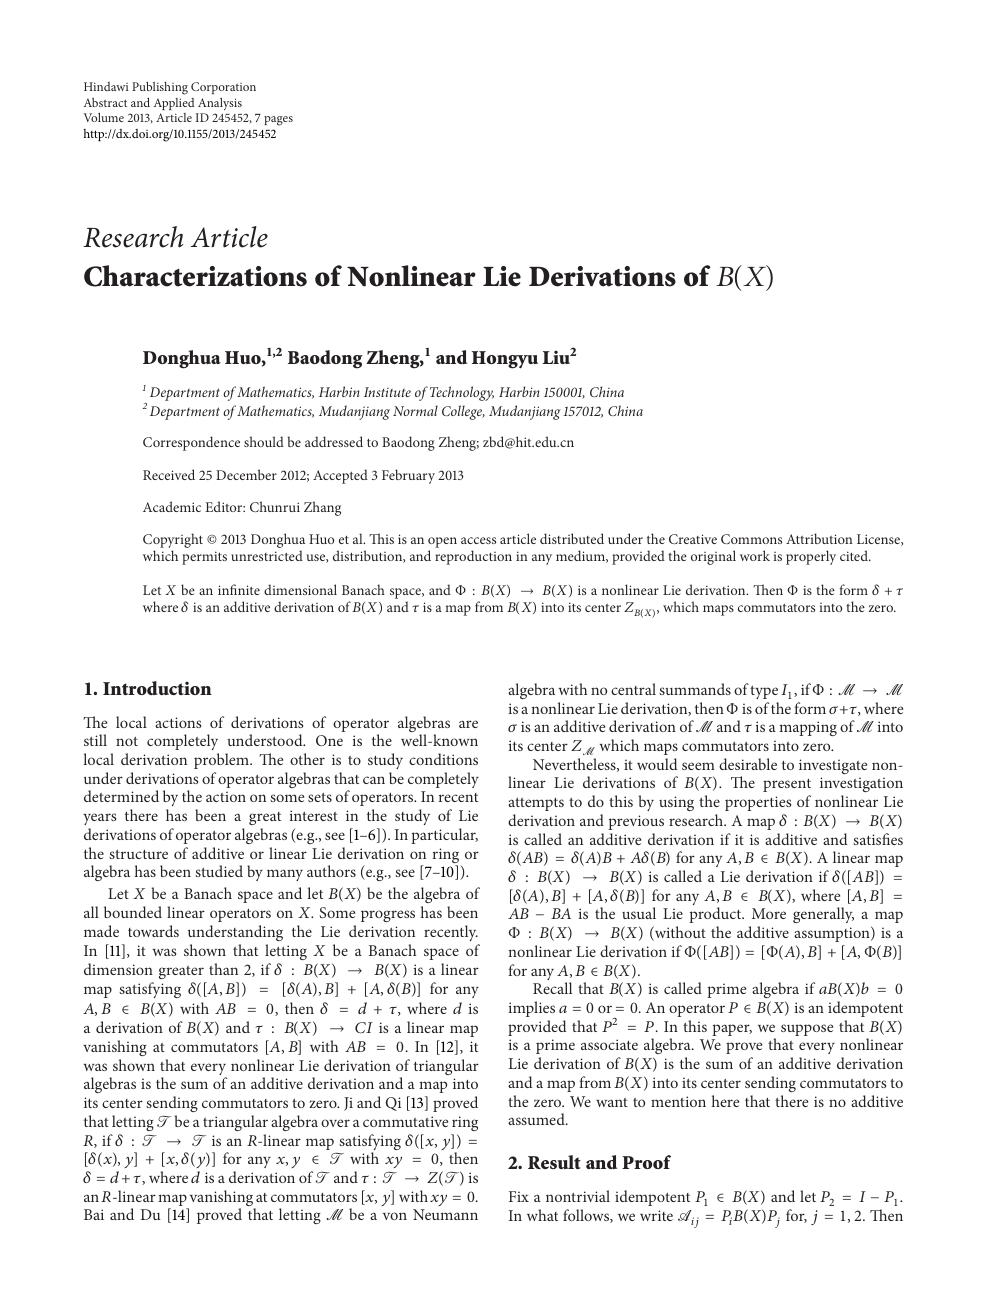 Characterizations Of Nonlinear Lie Derivations Of B X Topic Of Research Paper In Mathematics Download Scholarly Article Pdf And Read For Free On Cyberleninka Open Science Hub